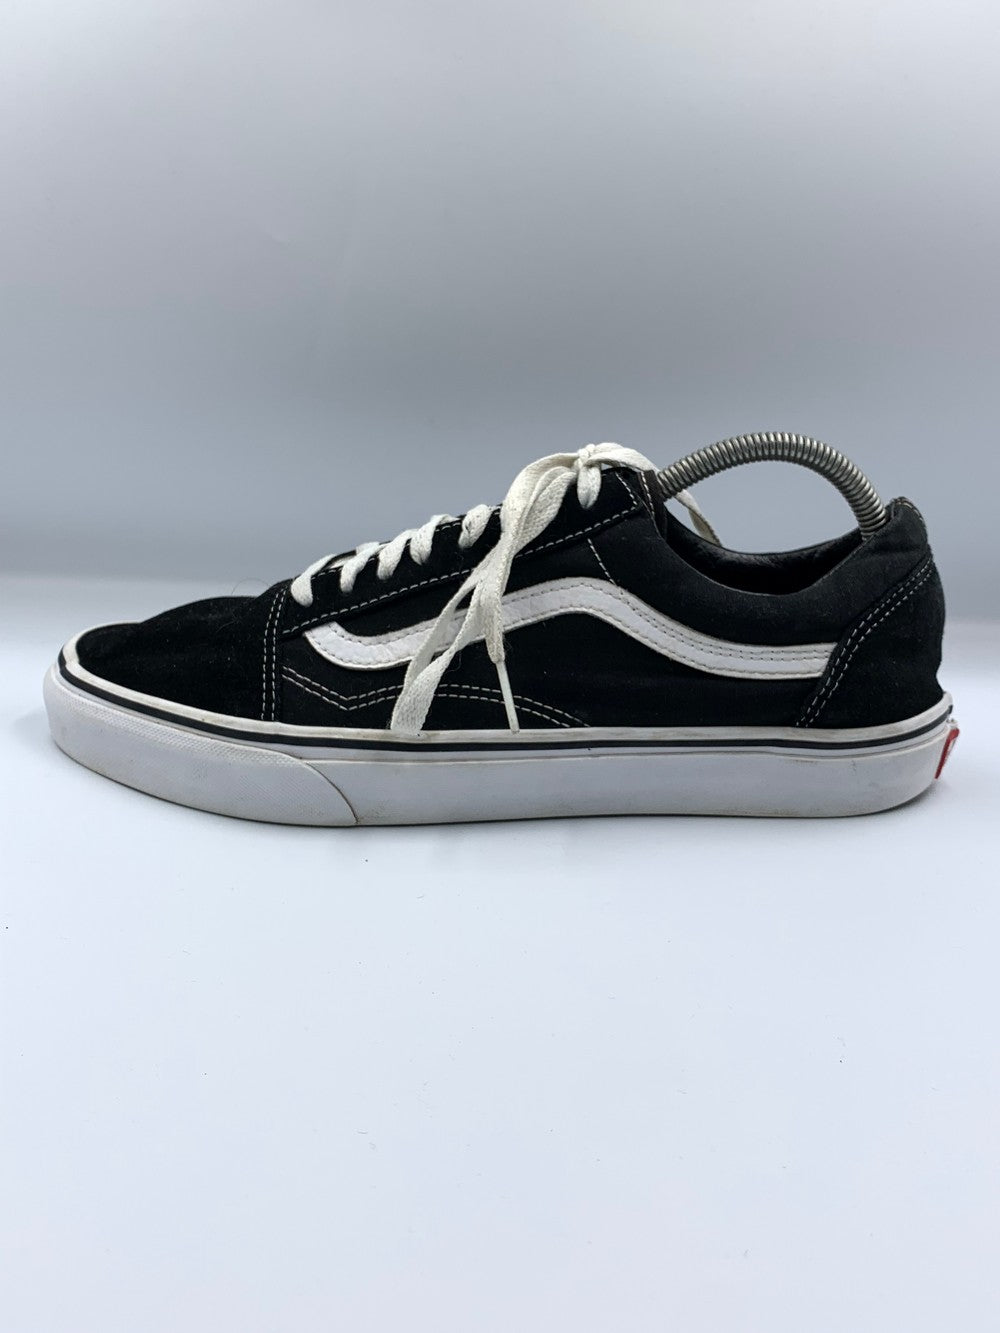 Vans Of The Wall Original Brand Sports Black Casual Shoes For Men